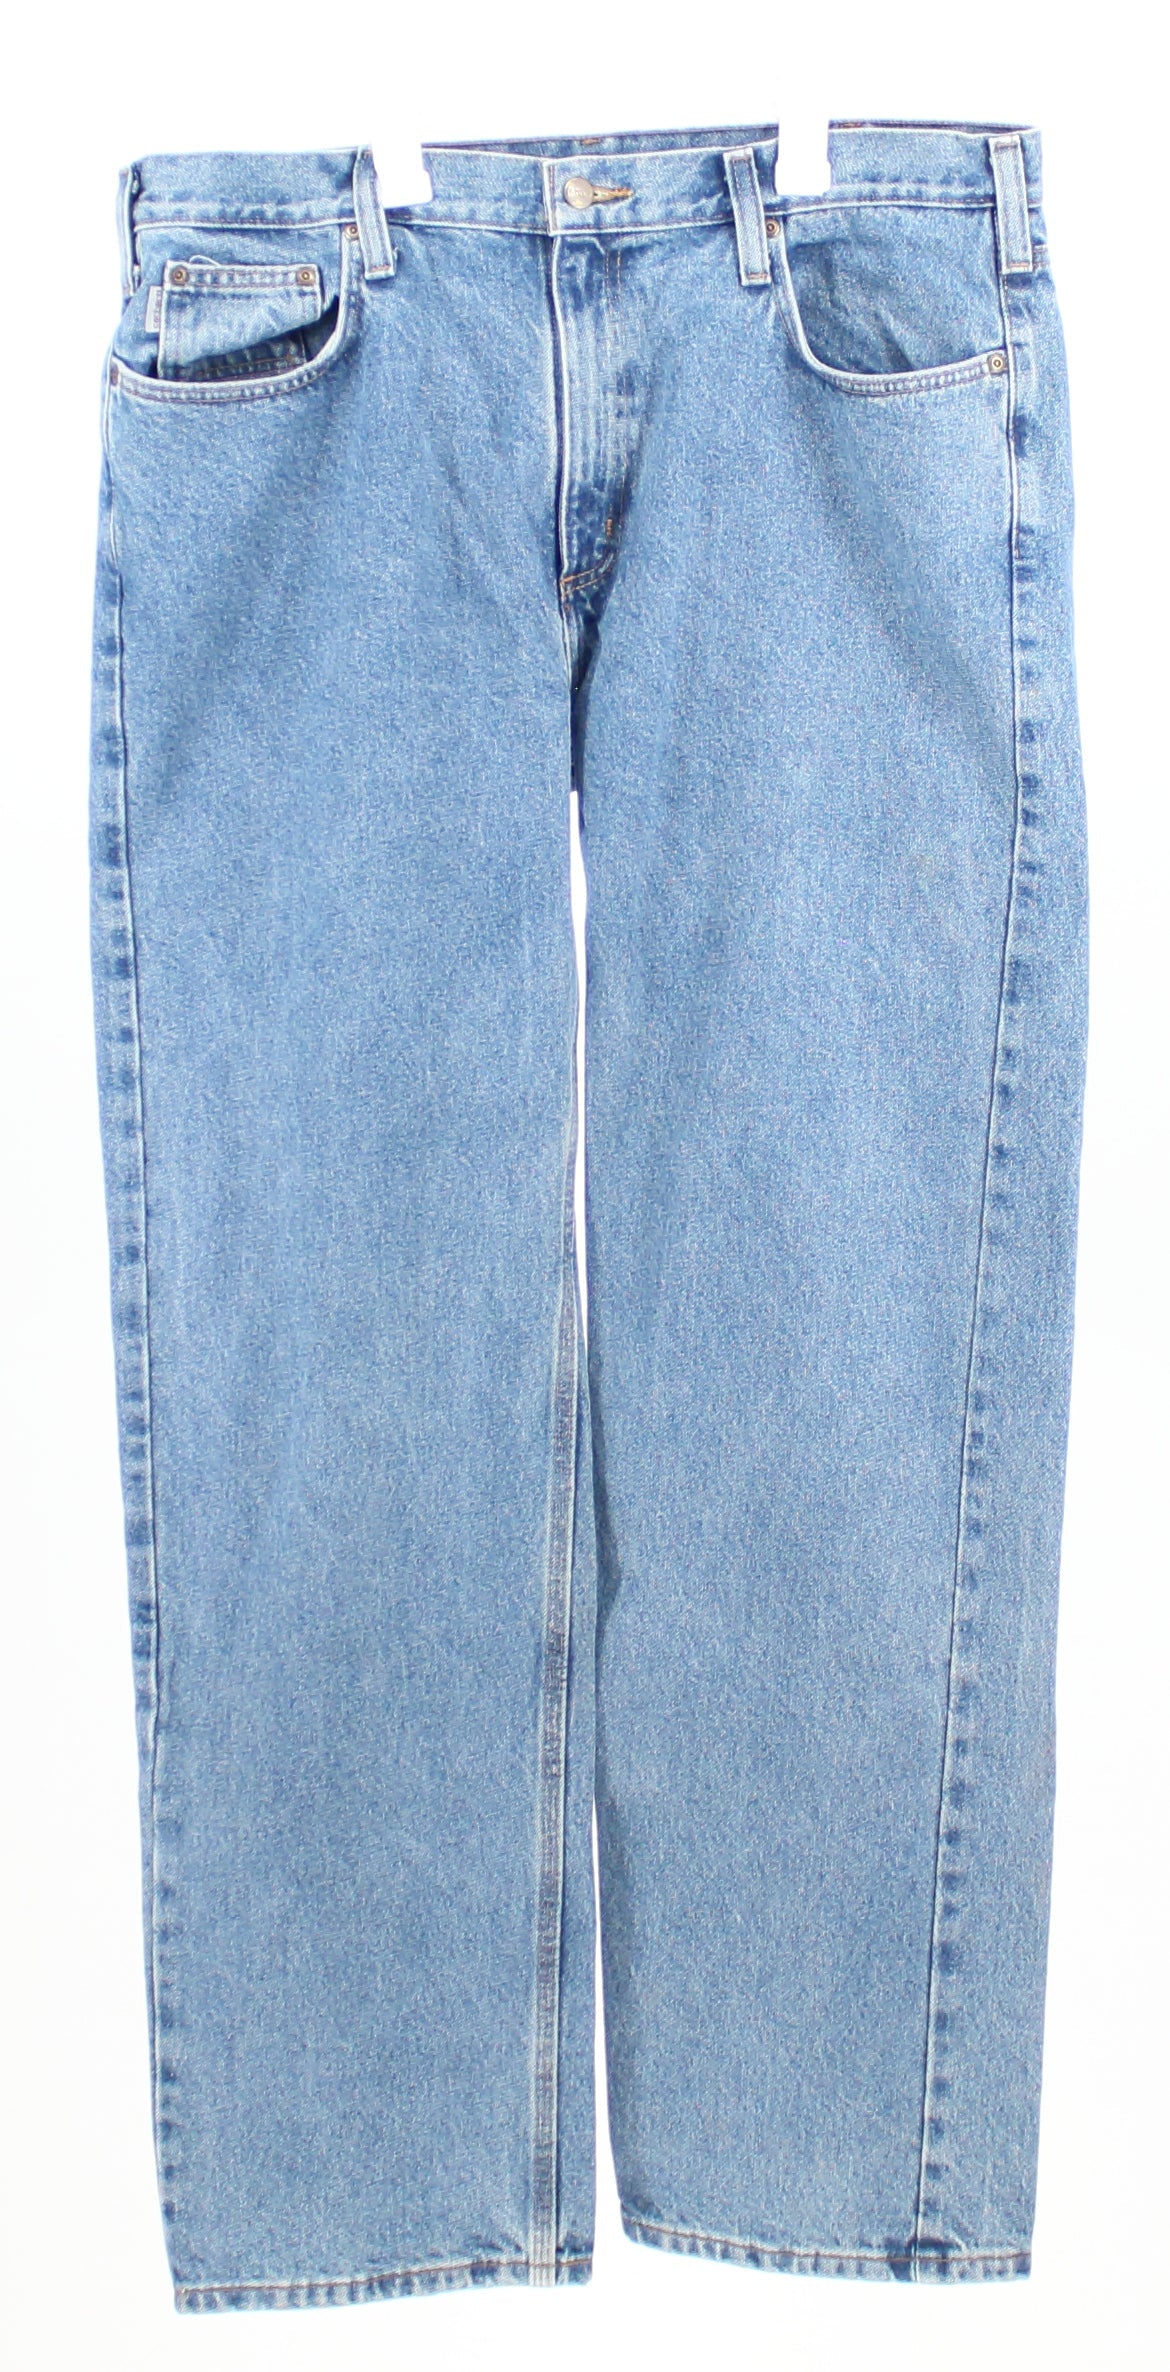 Carhartt Medium Washed Relaxed Fit Denim Jeans